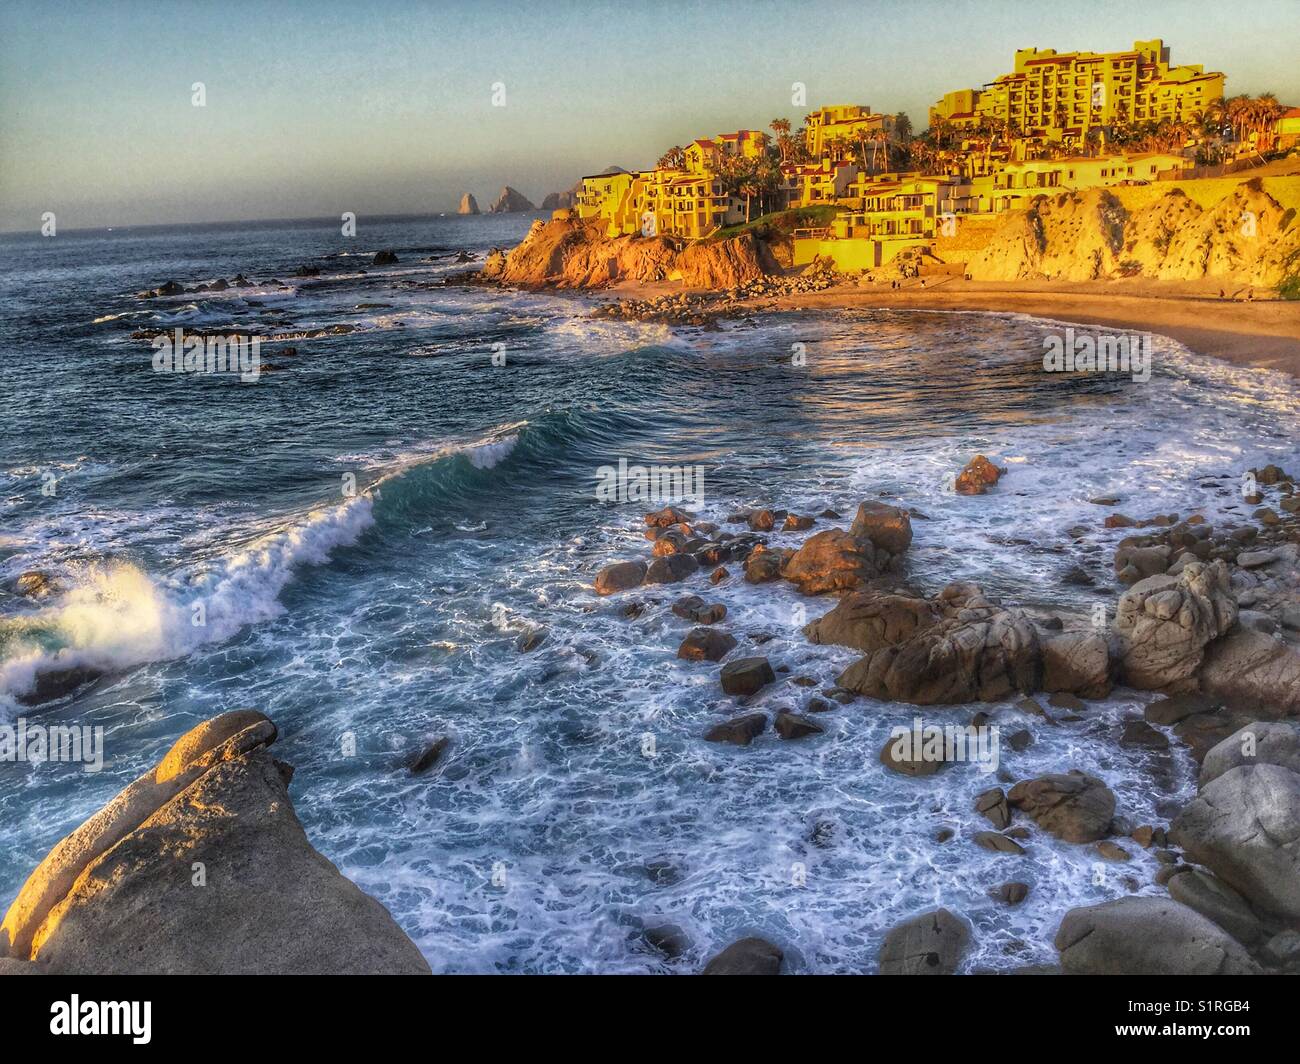 Evening glow on the rugged coastline looking towards the infamous Arch in Cabo San Lucas, Mexico. Stock Photo